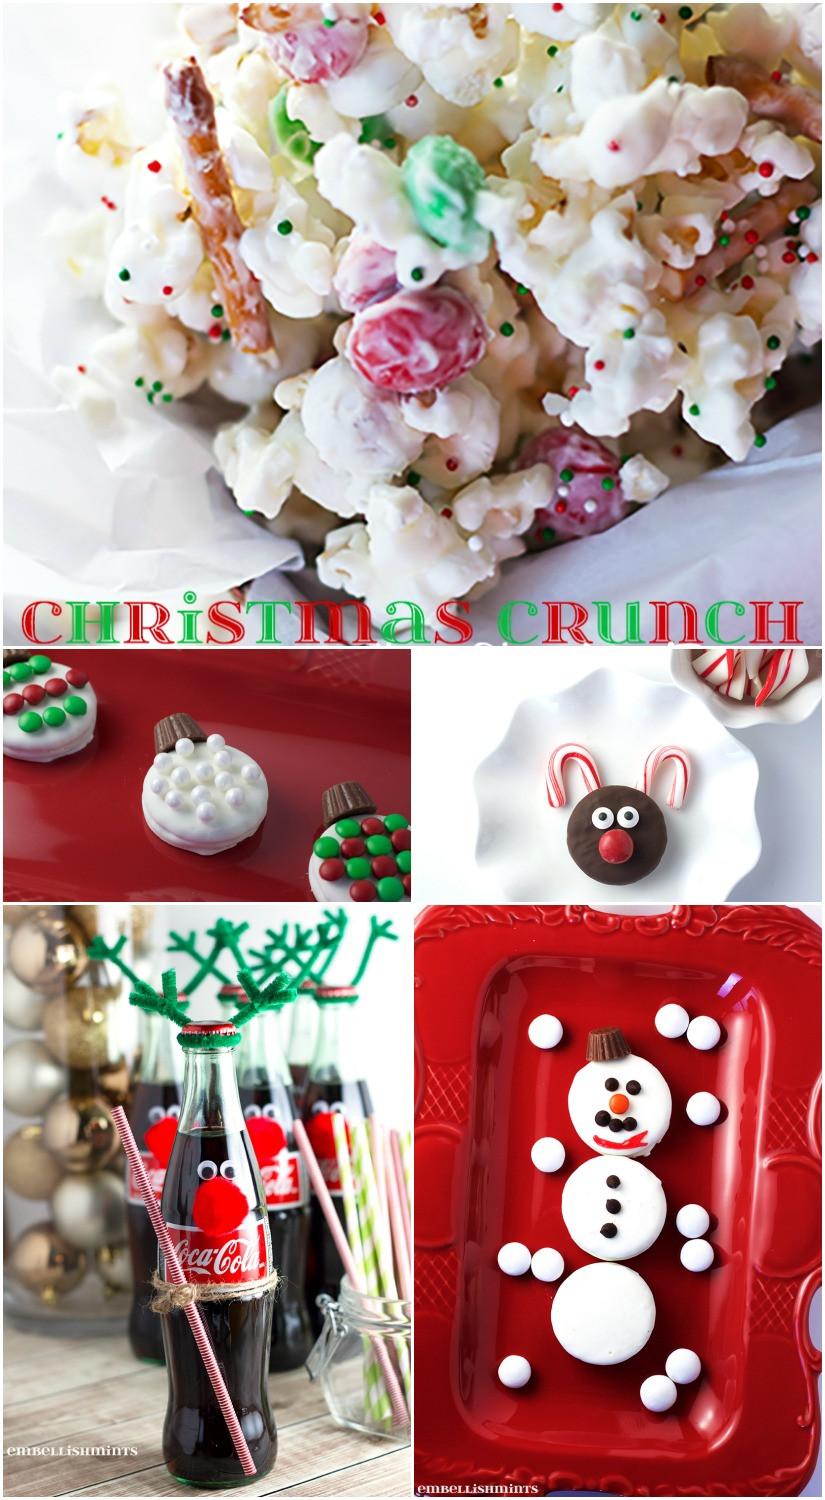 Holiday Party Food Ideas Kids
 Christmas Party Food Ideas For Kids Embellishmints